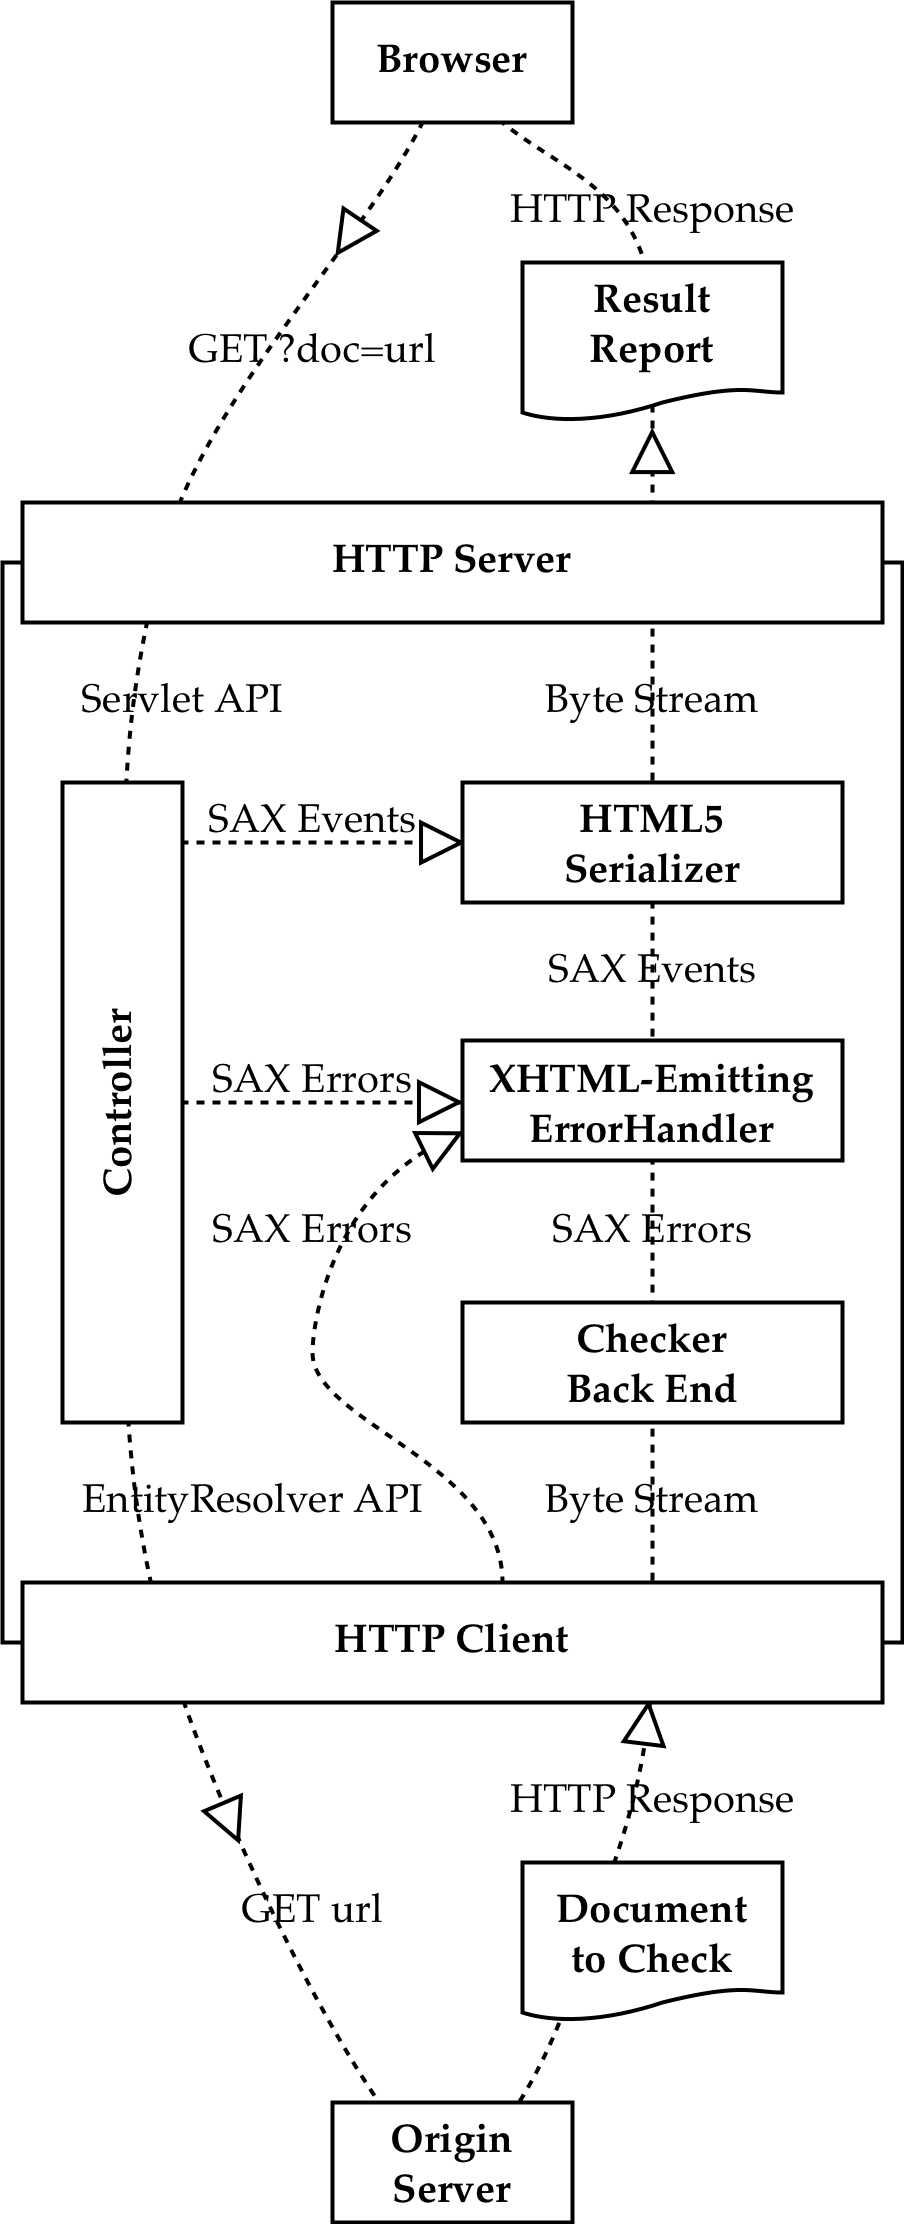 The browser sends a request to the HTTP server of the checker. The controller fetches the document to check using the HTTP client of the checker. The controller writes output using an HTML5 serializer. Errors are reported to an XHTML-emitting ErrorHandler that also writes to the serializer. Errors from the conformance checker back end are reported to the XHTML-emitting ErrorHandler as well.